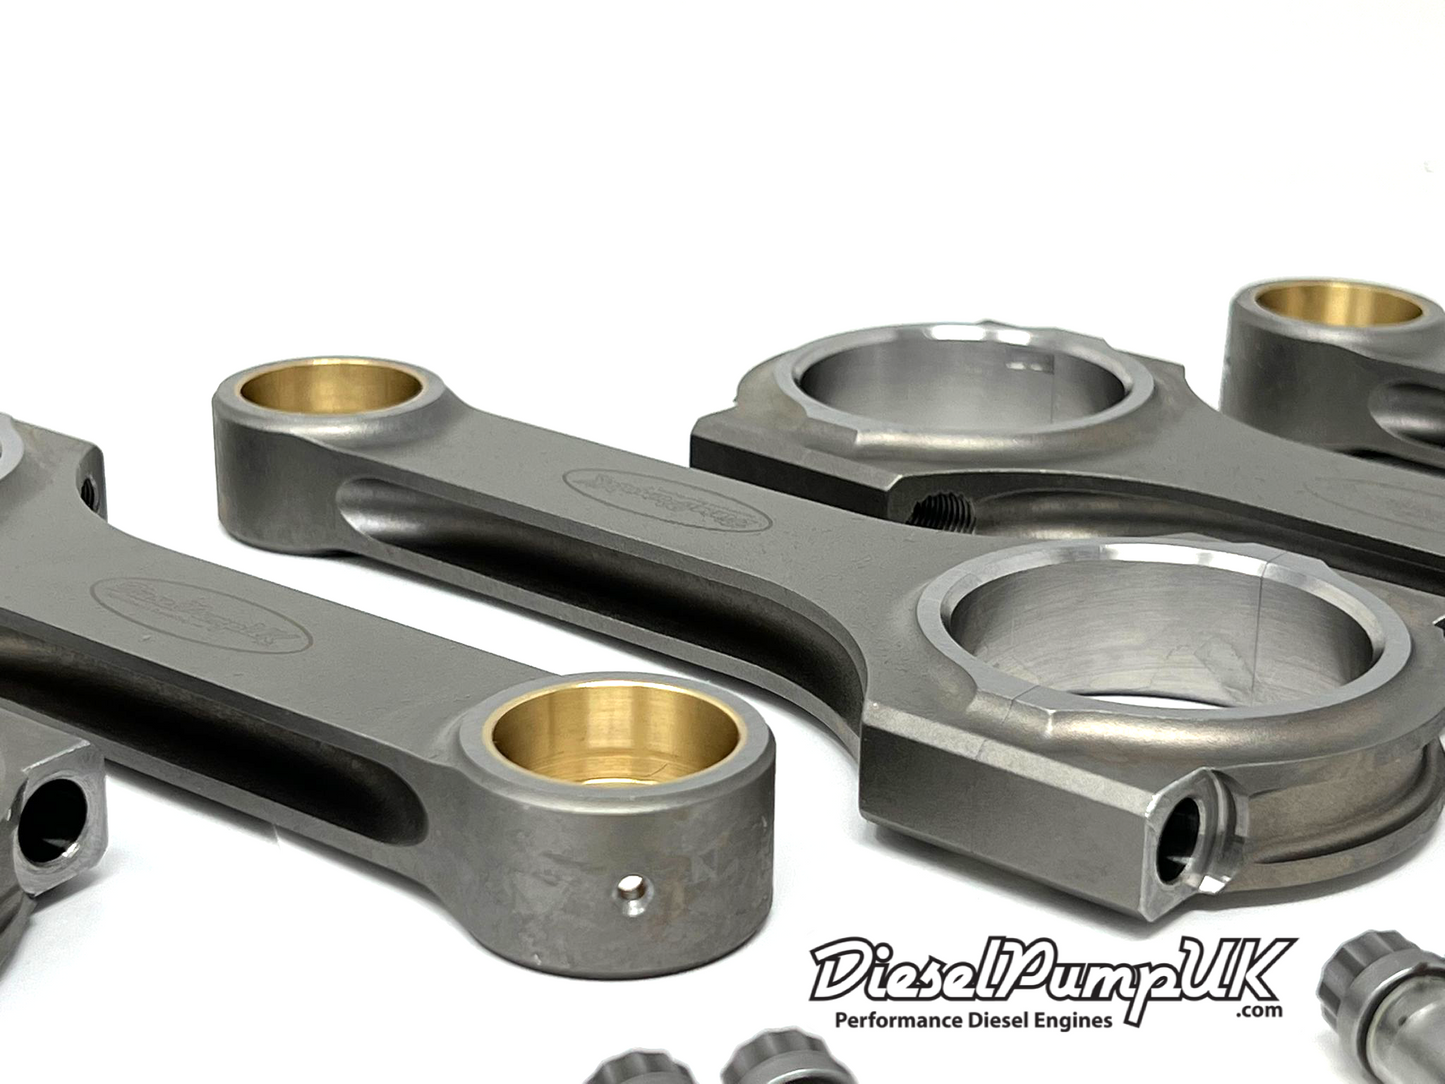 Forged H-beam Connecting Rods for the OM606